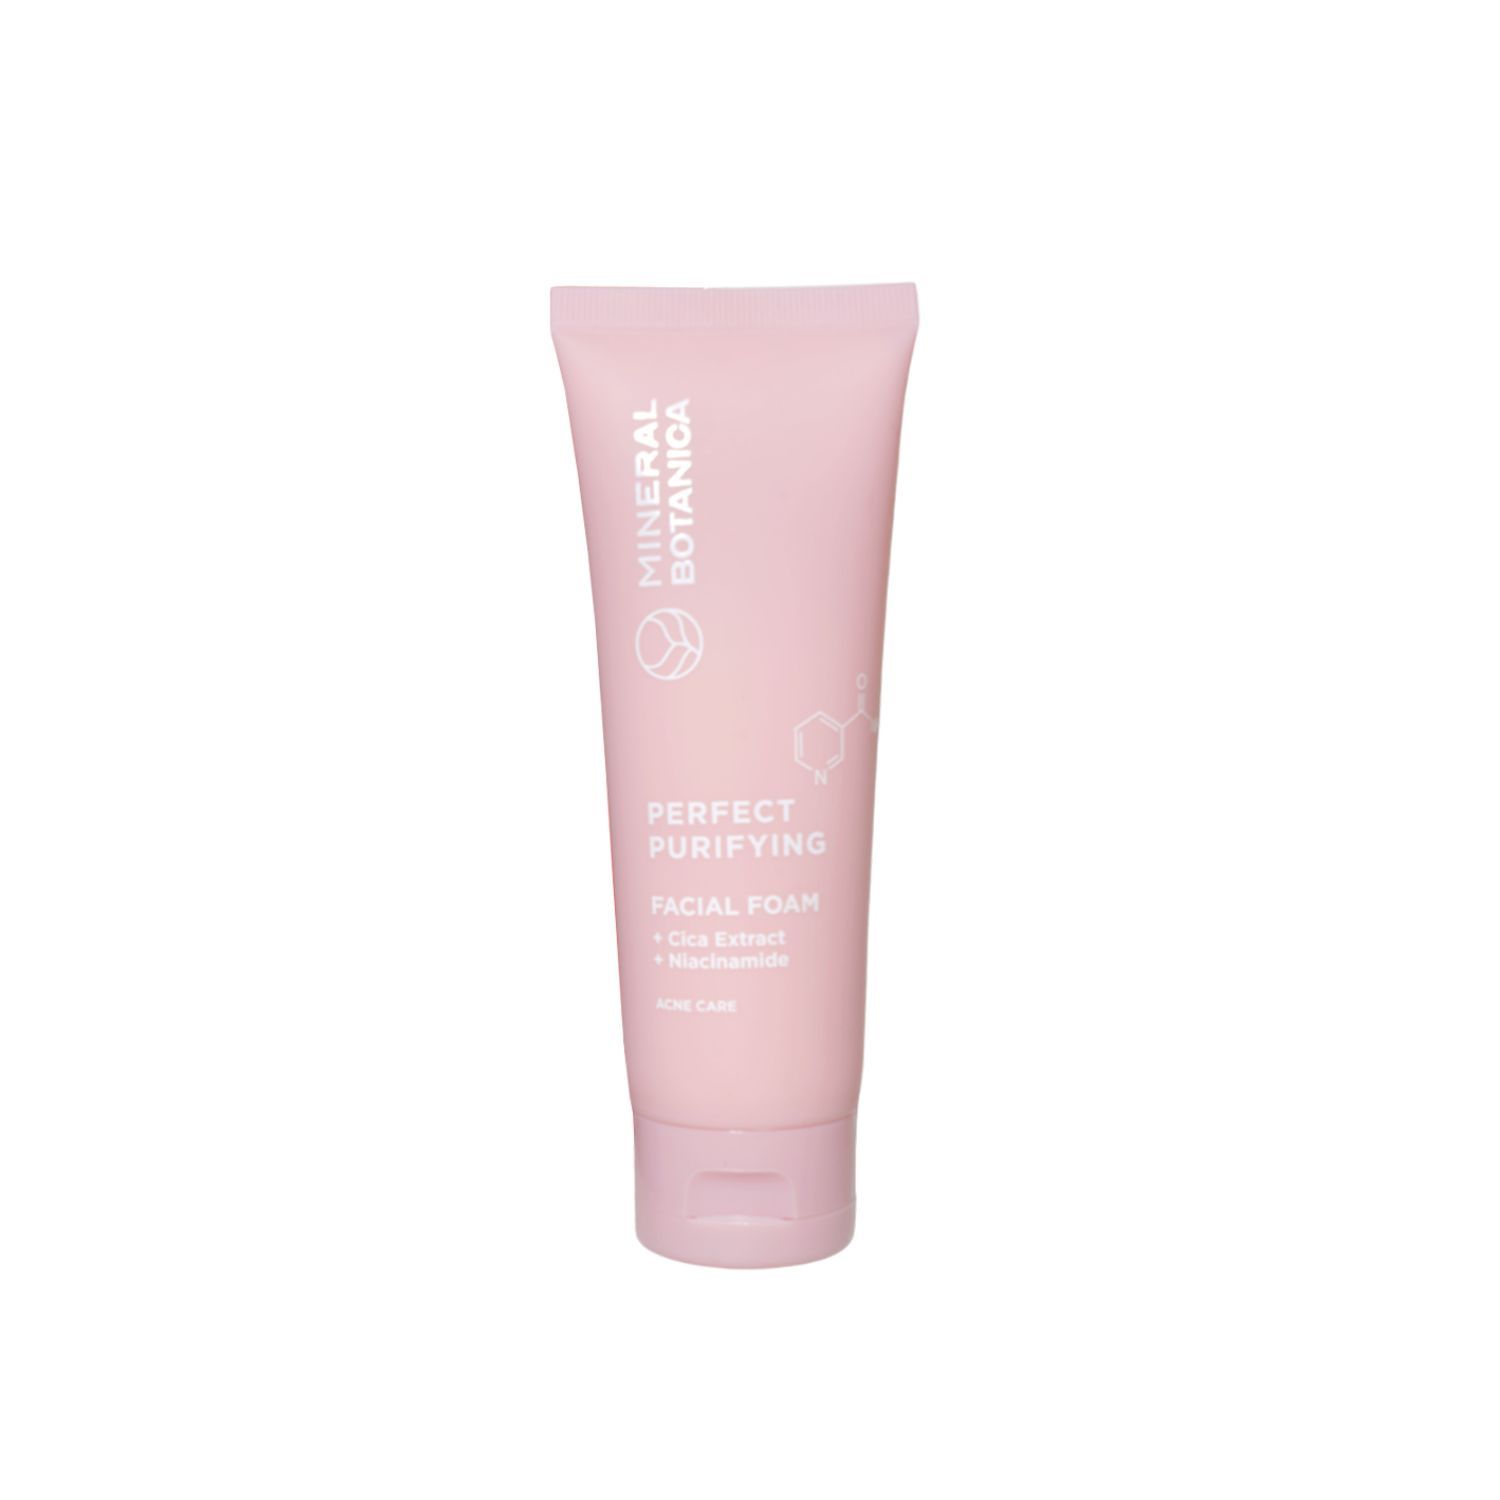 Mineral Botanica Perfect Purifying Facial Foam 100g - 2